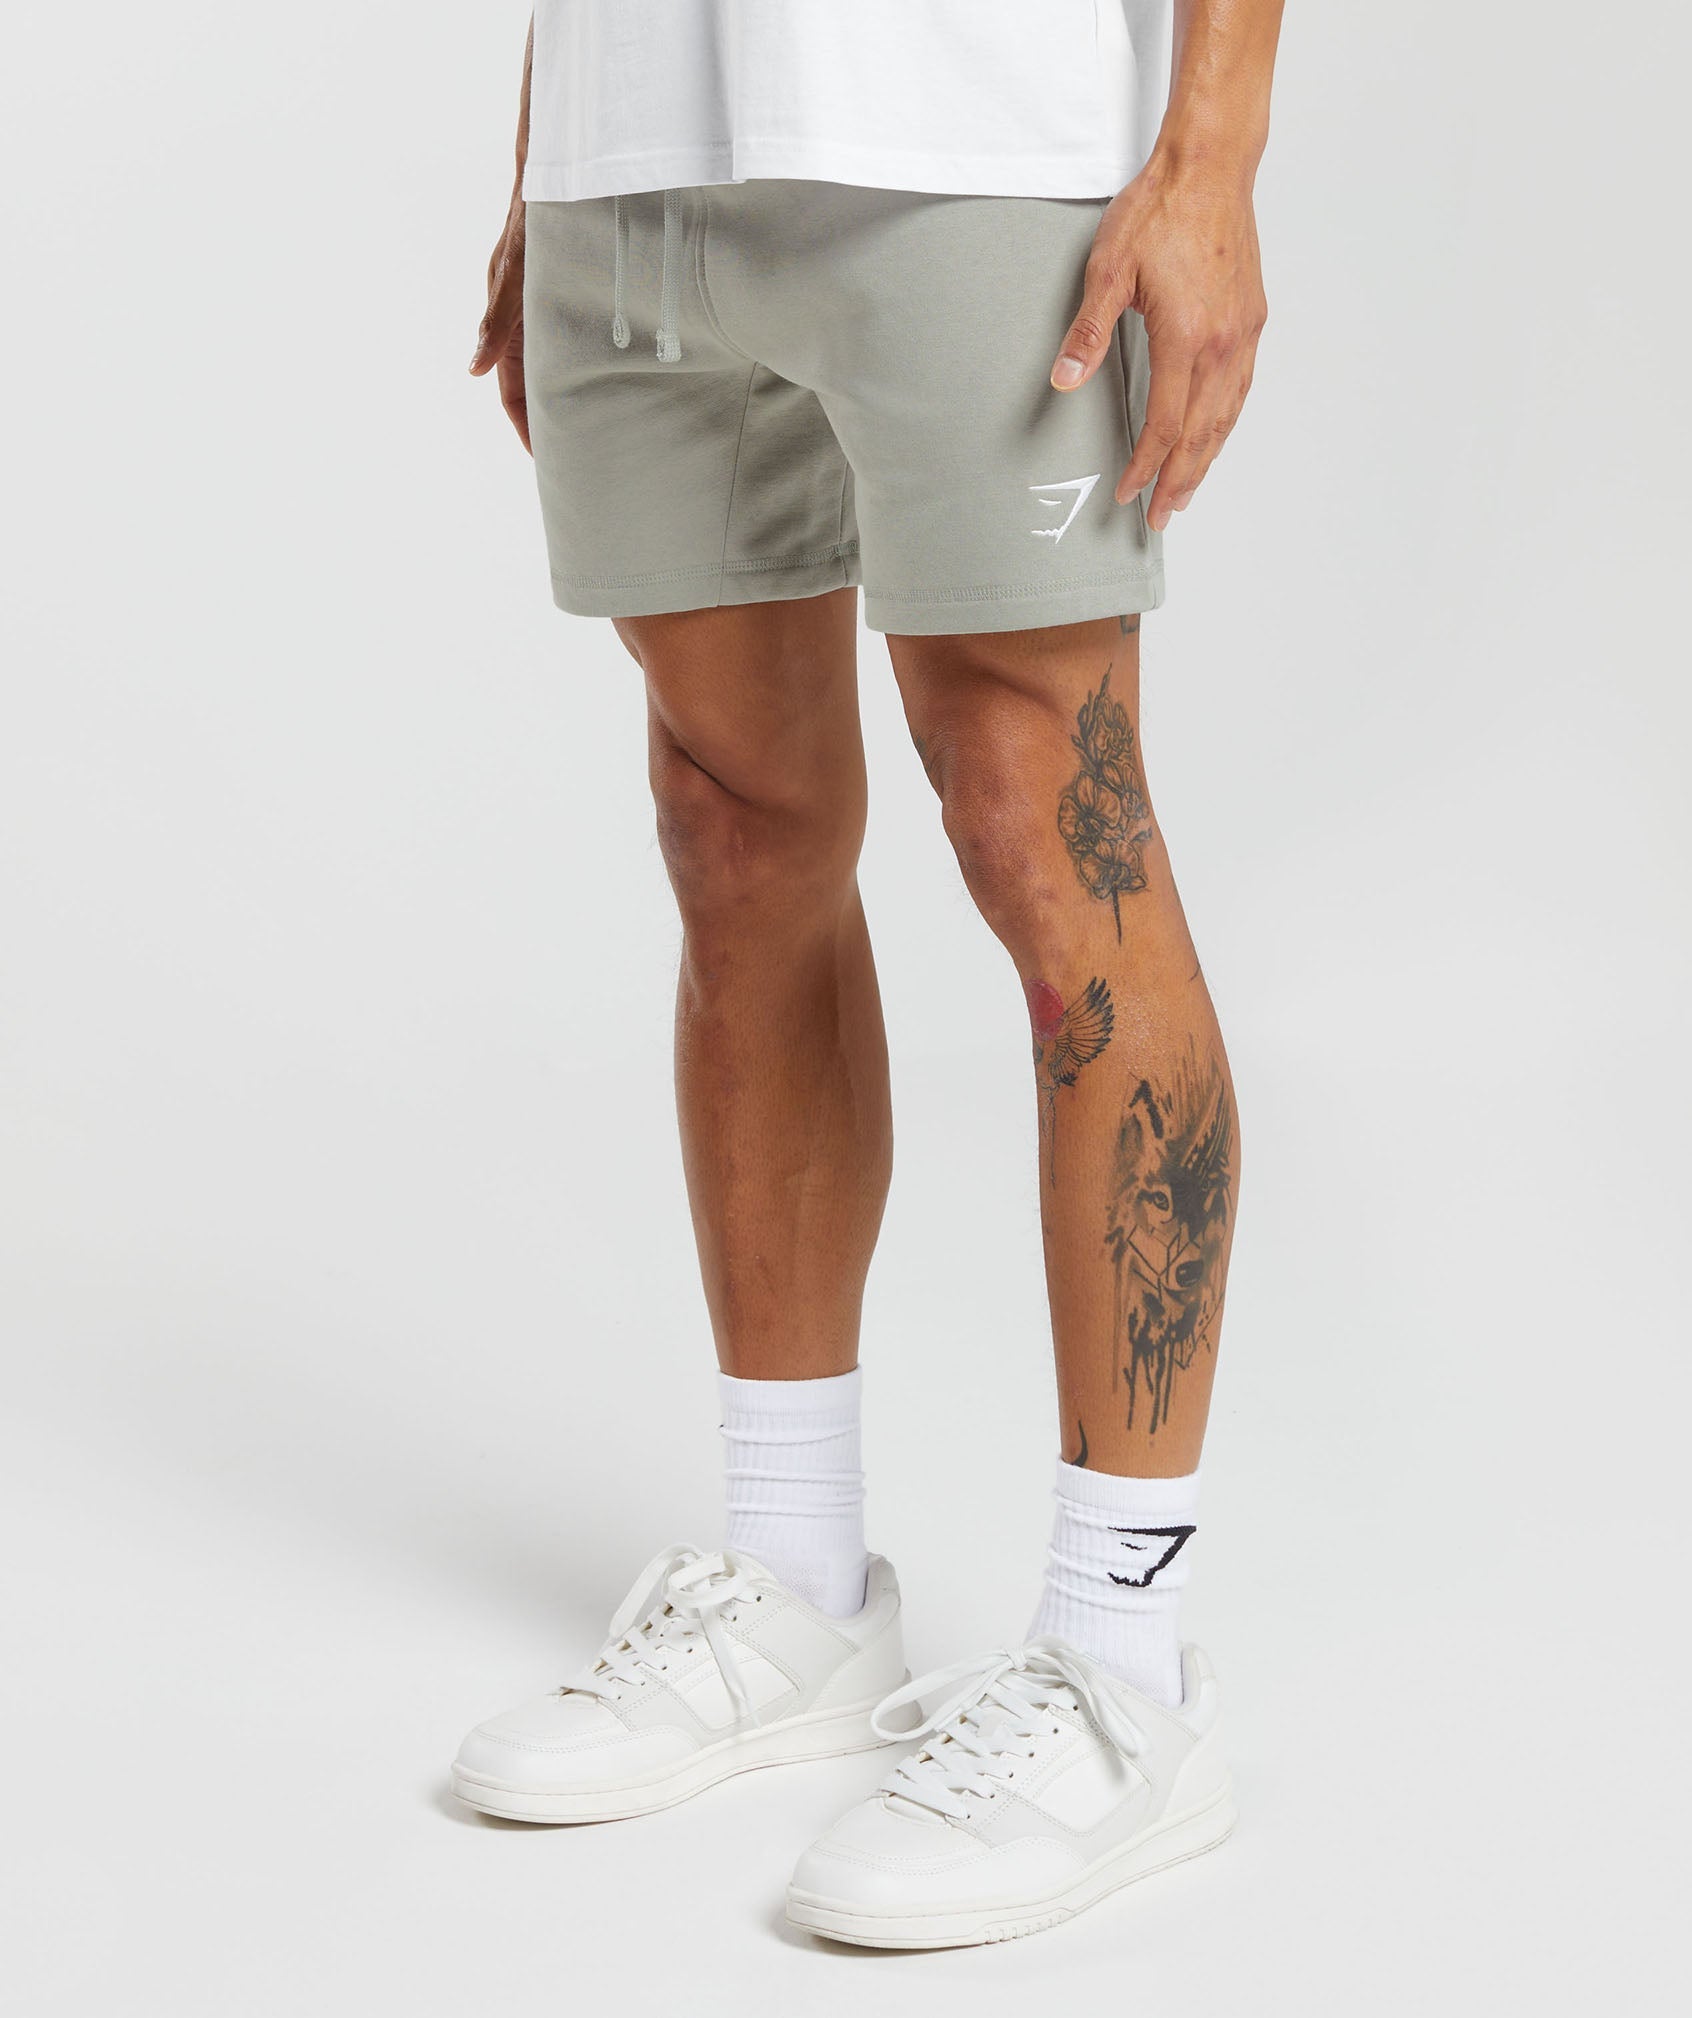 Crest 7" Shorts in Stone Grey - view 3